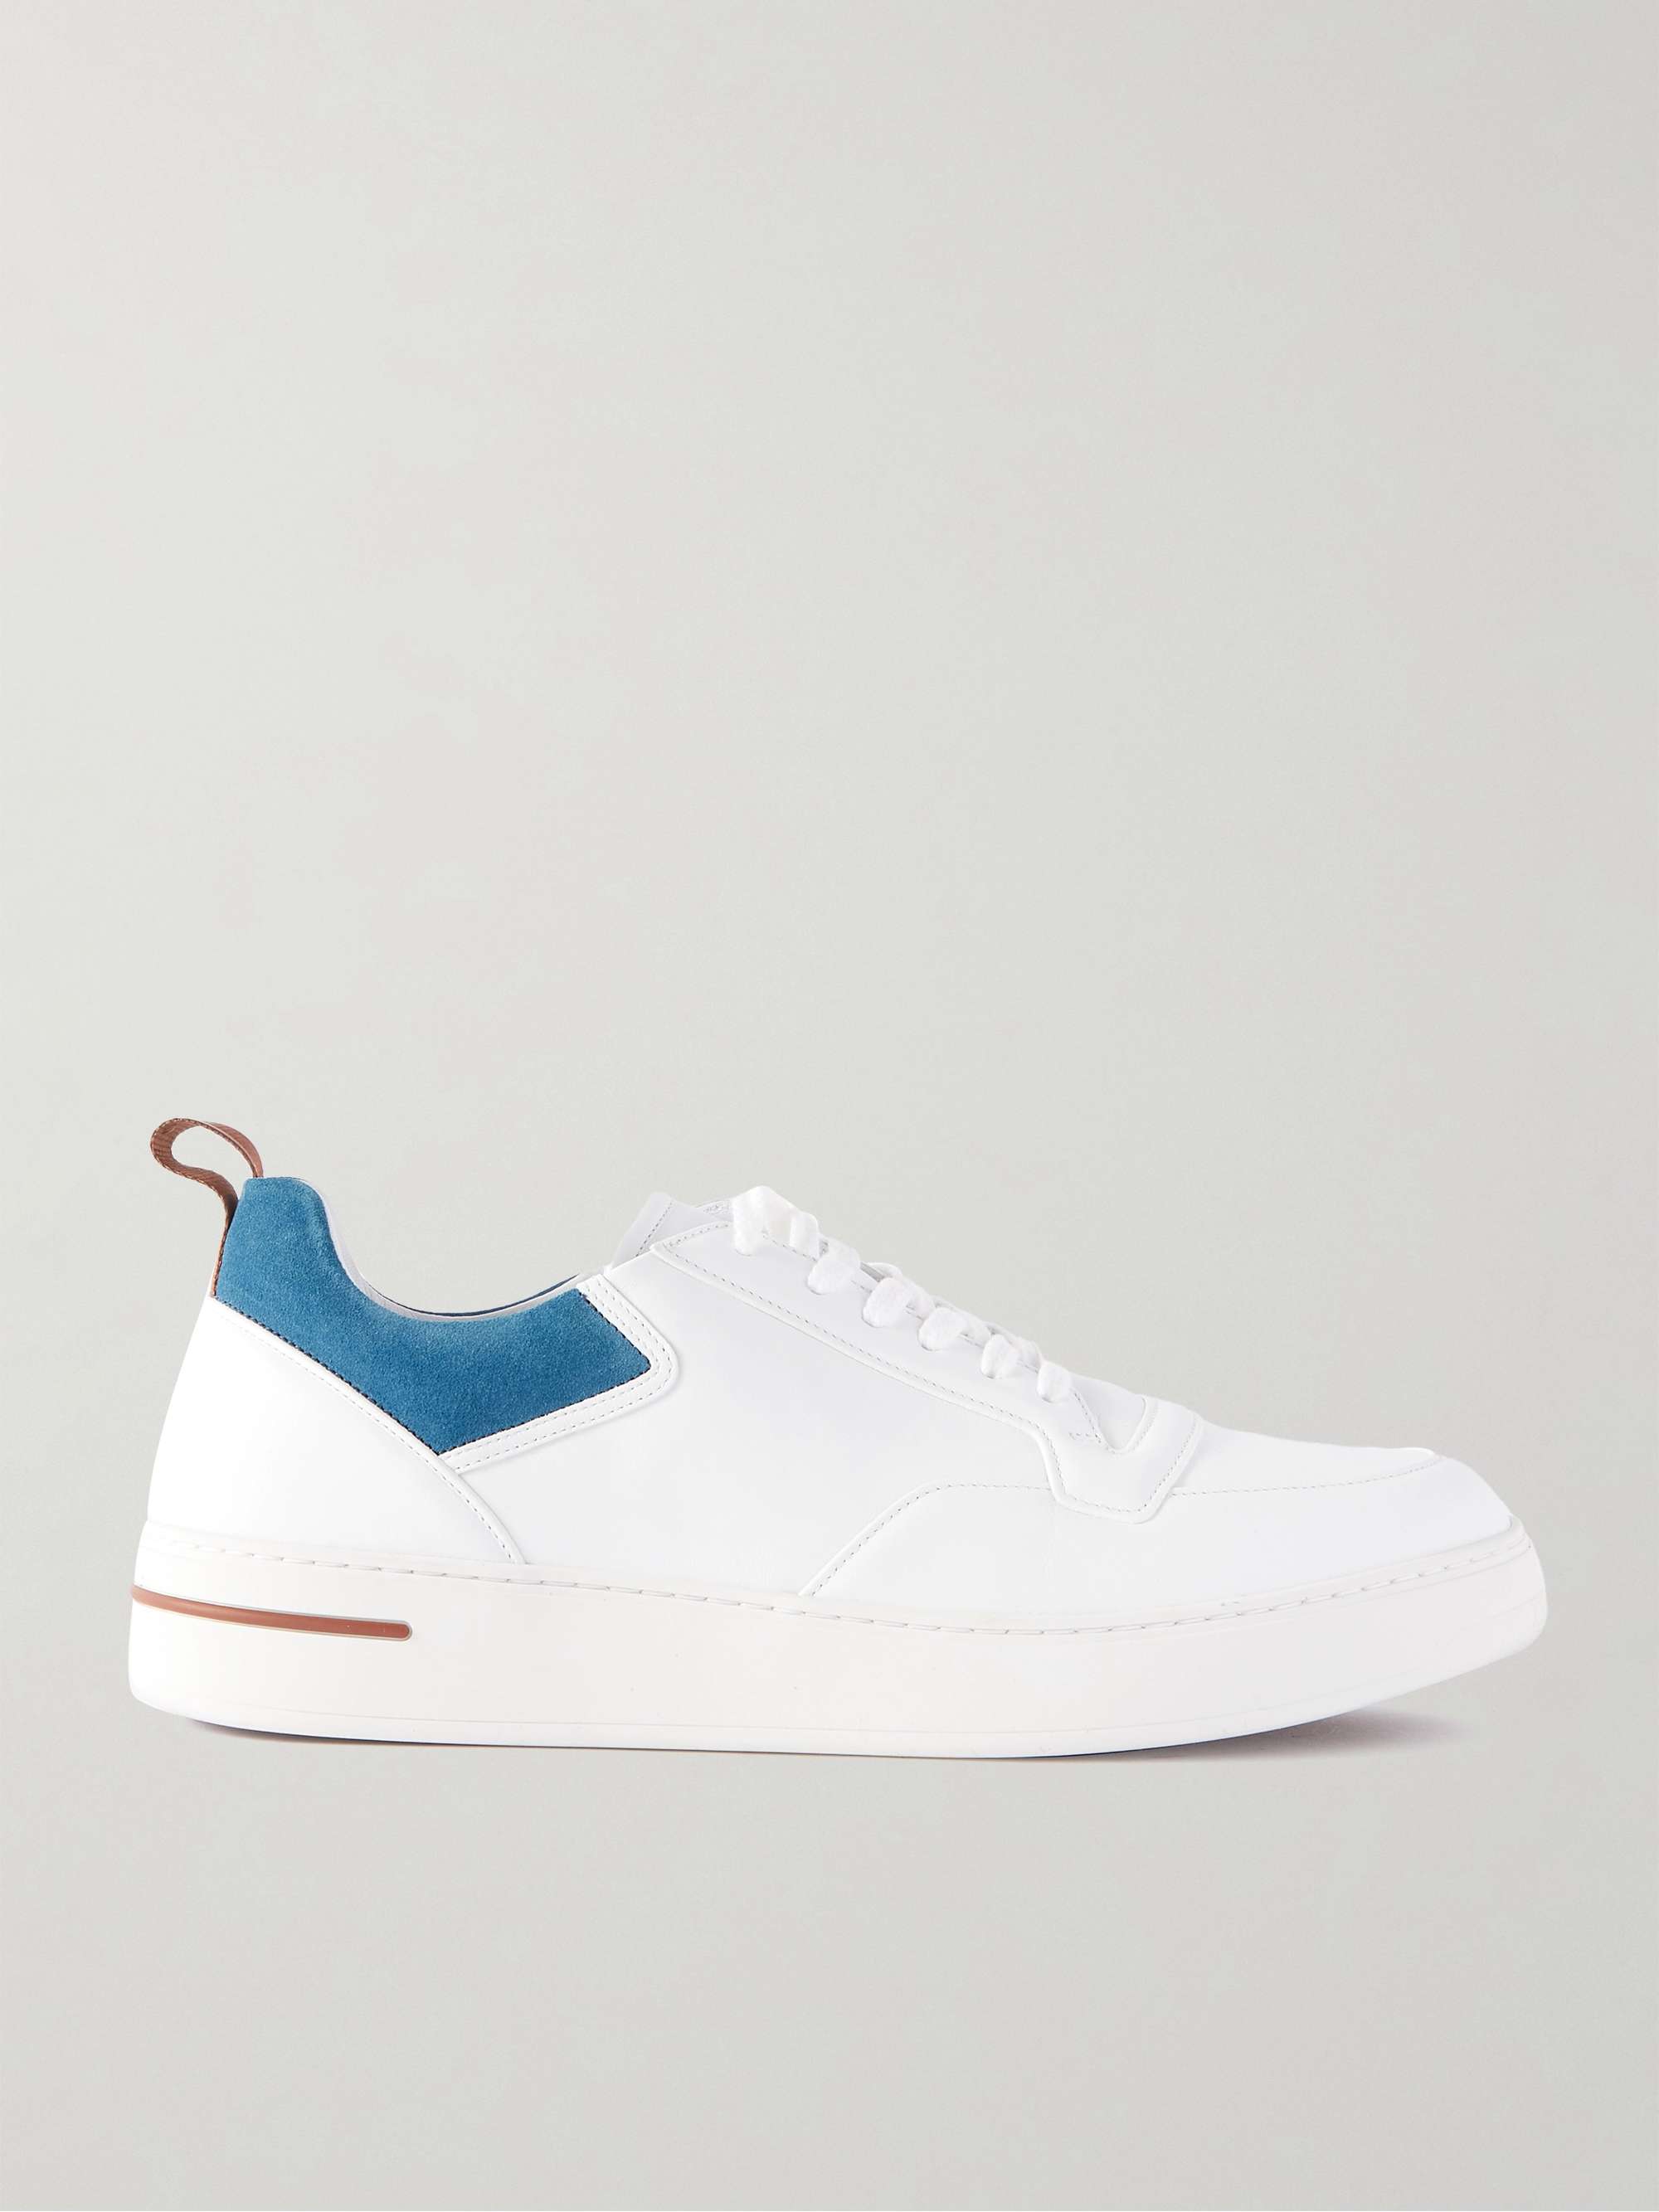 LORO PIANA Newport Suede-Trimmed Leather Sneakers